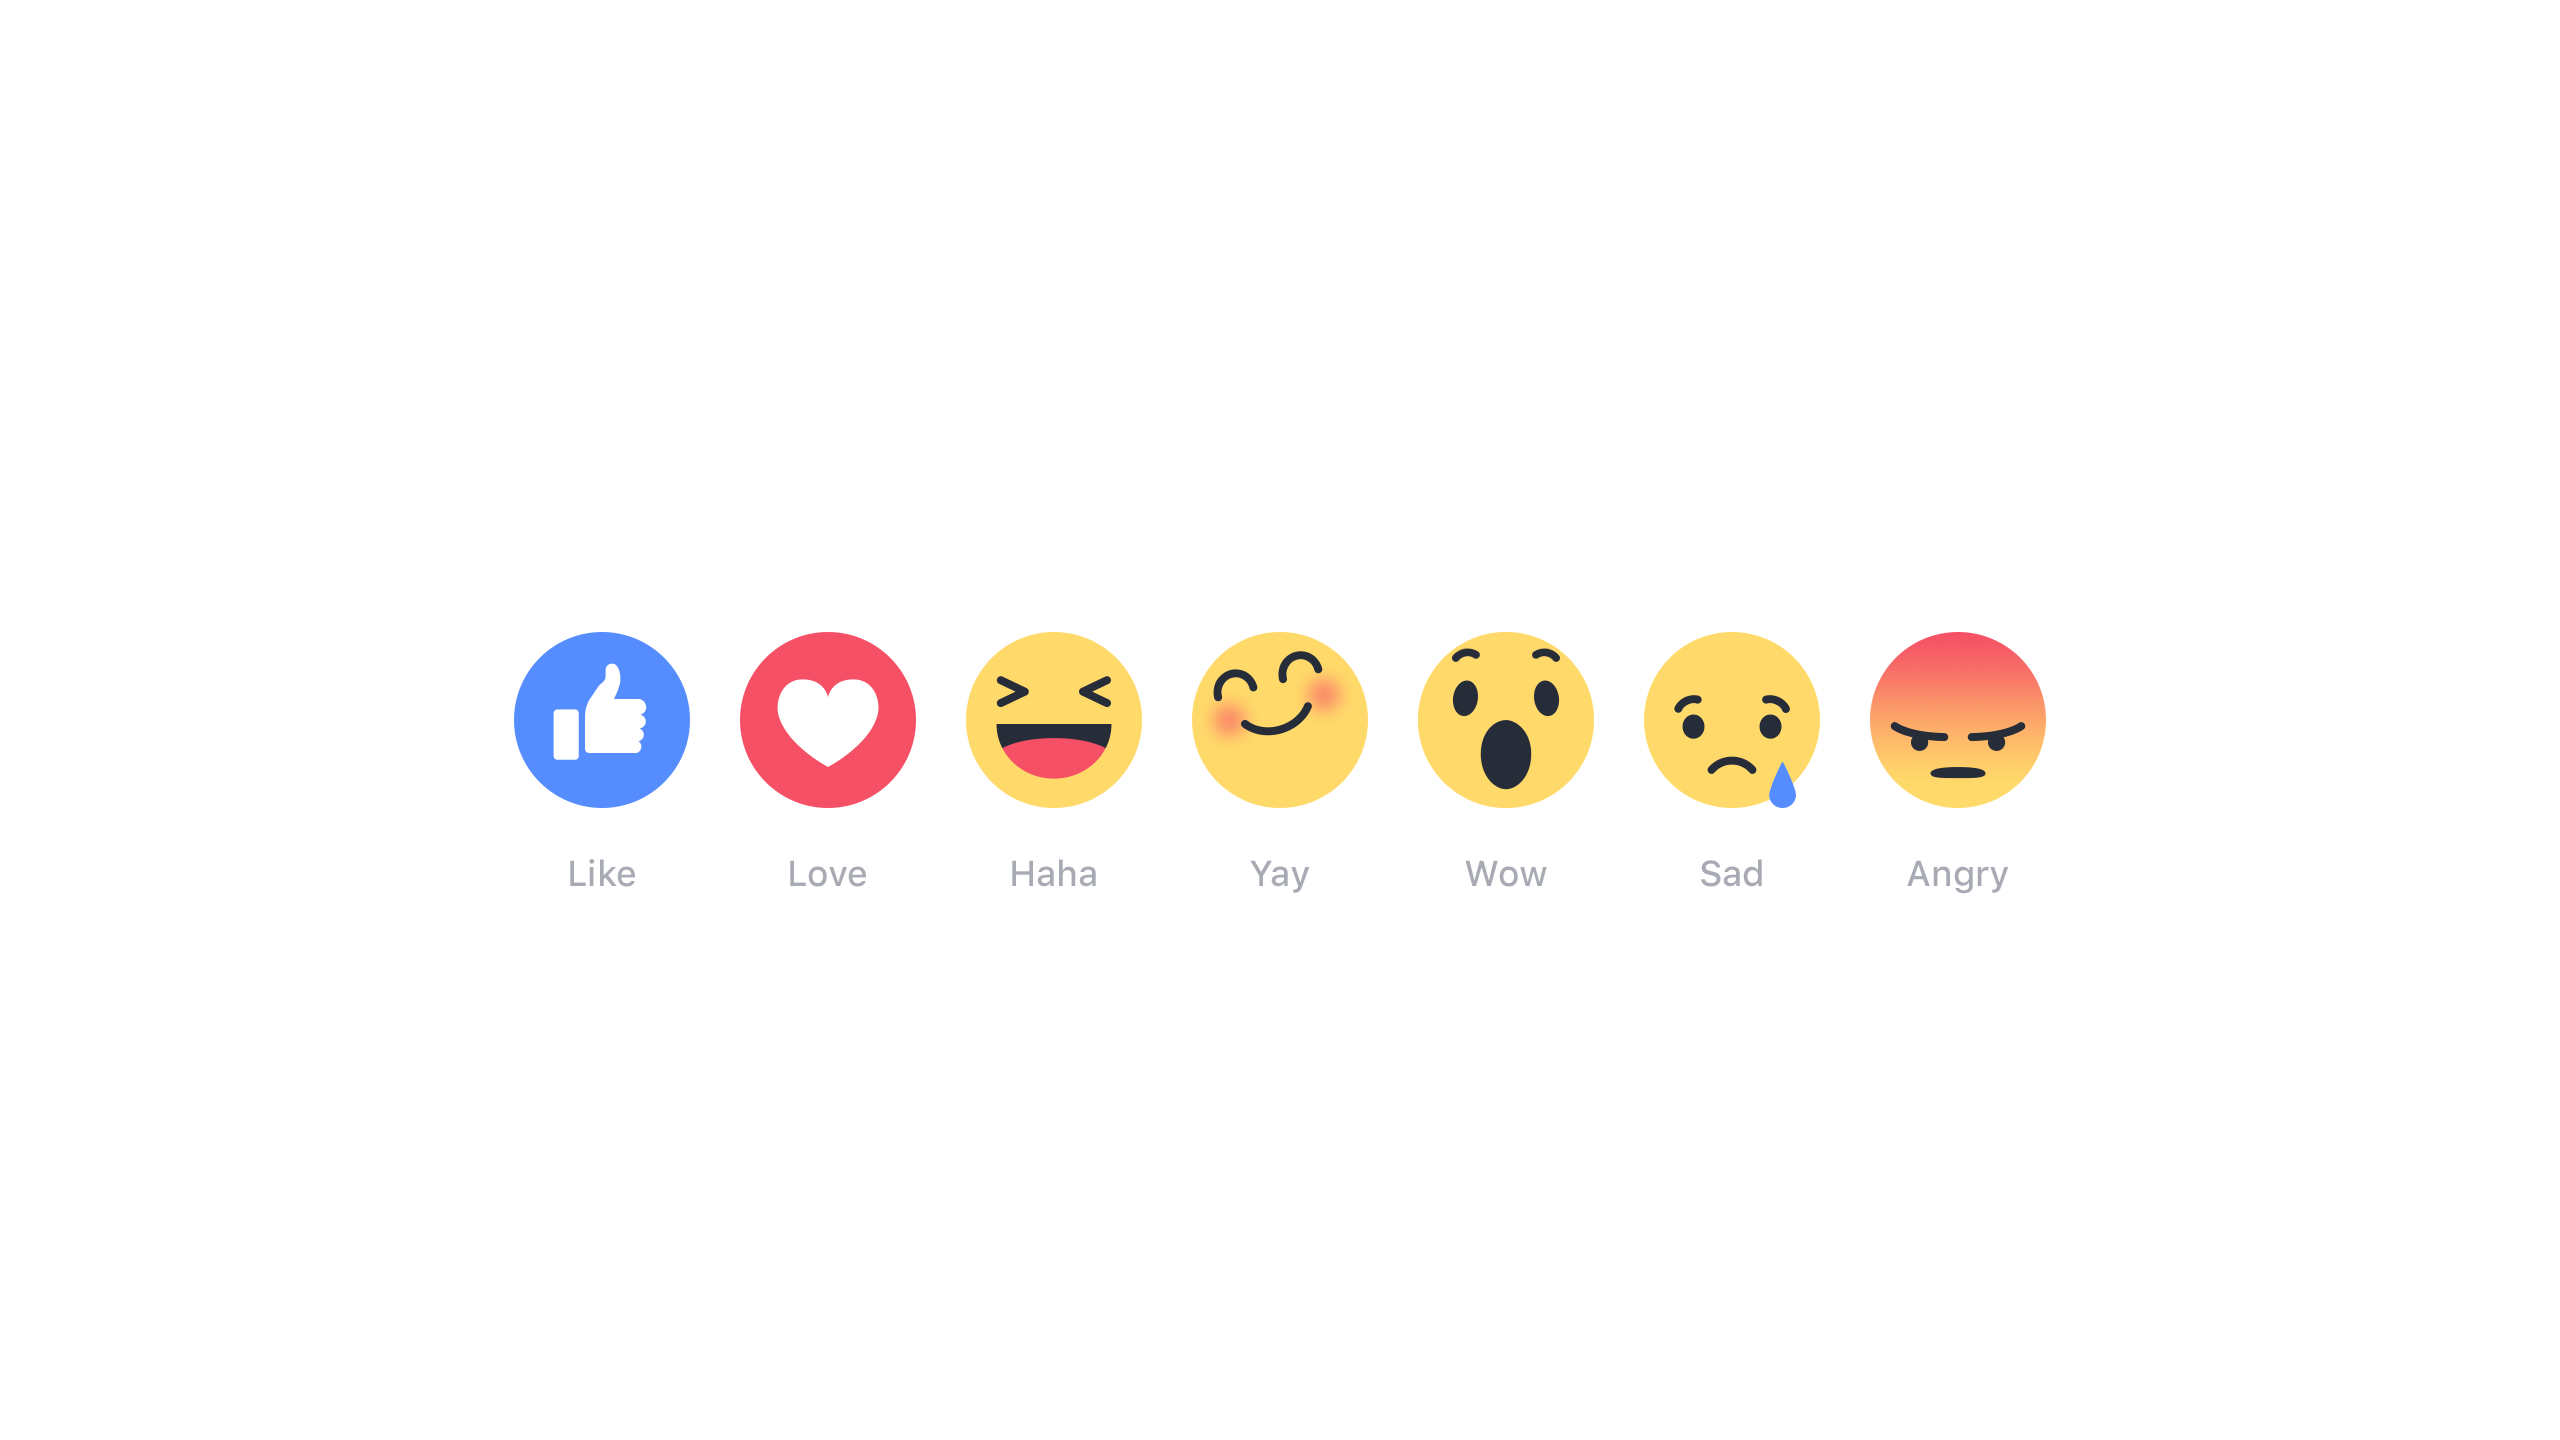 Facebook’s new “Like” buttons may soon shape your news feed as more data is gathered on users